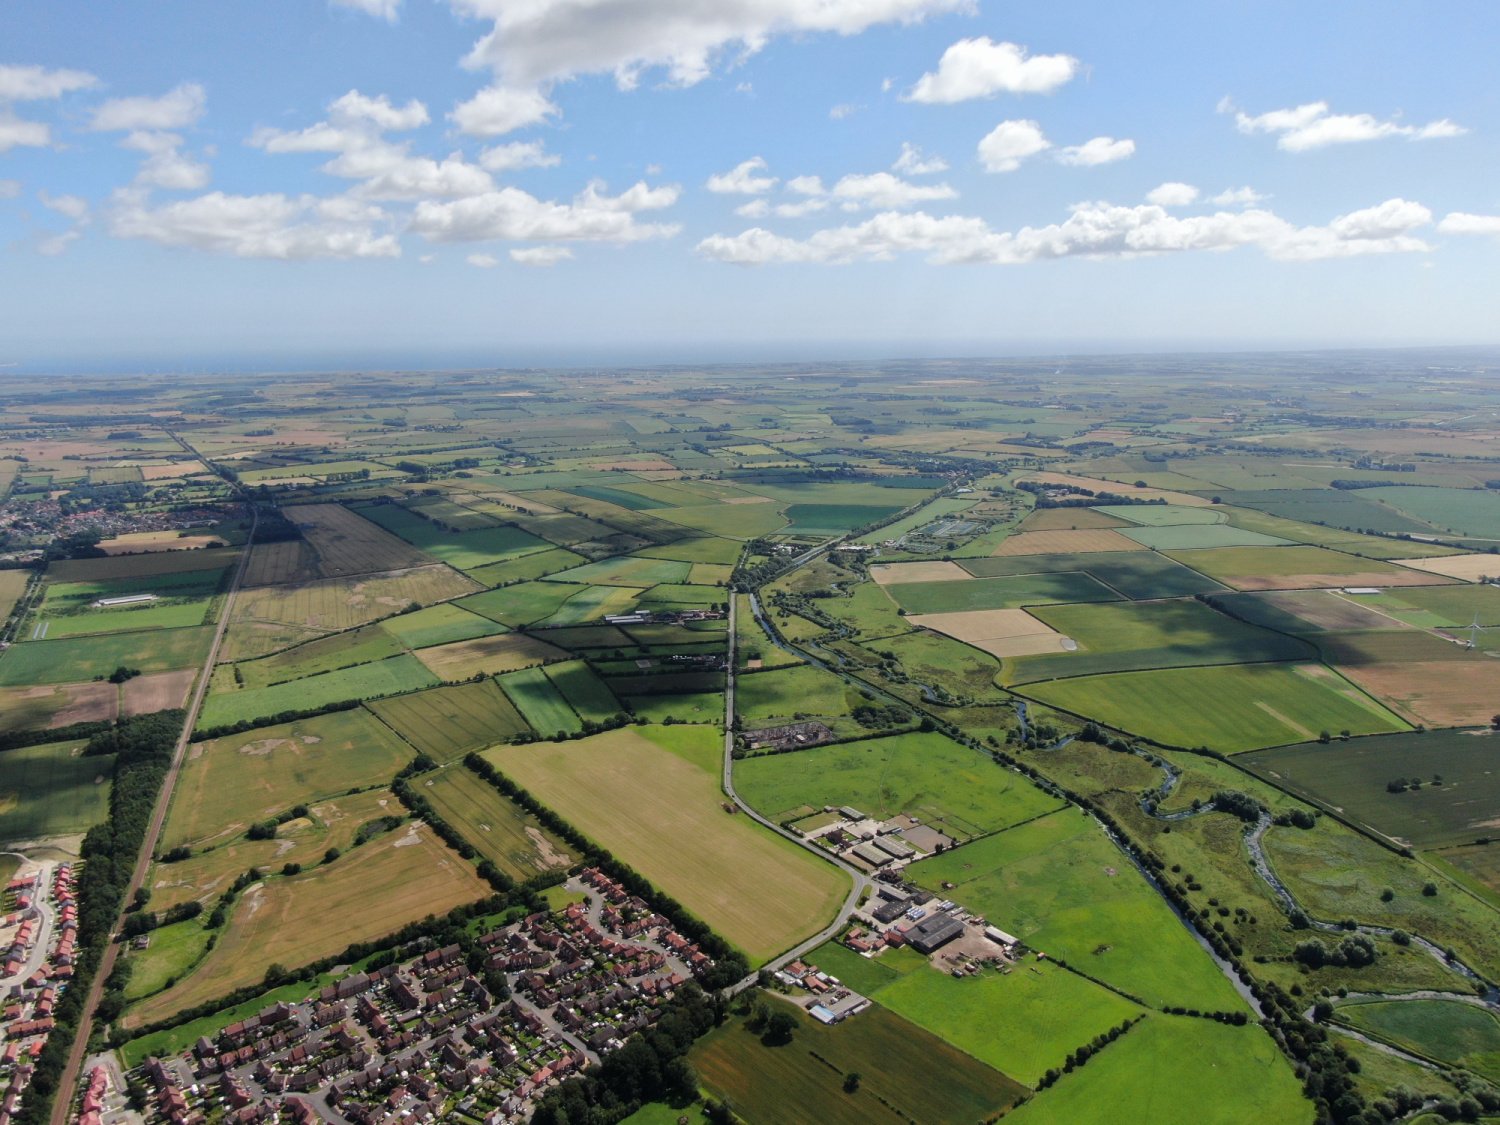 Image name driffield aerial view east yorkshire the 11 image from the post Eastburn in Yorkshire.com.